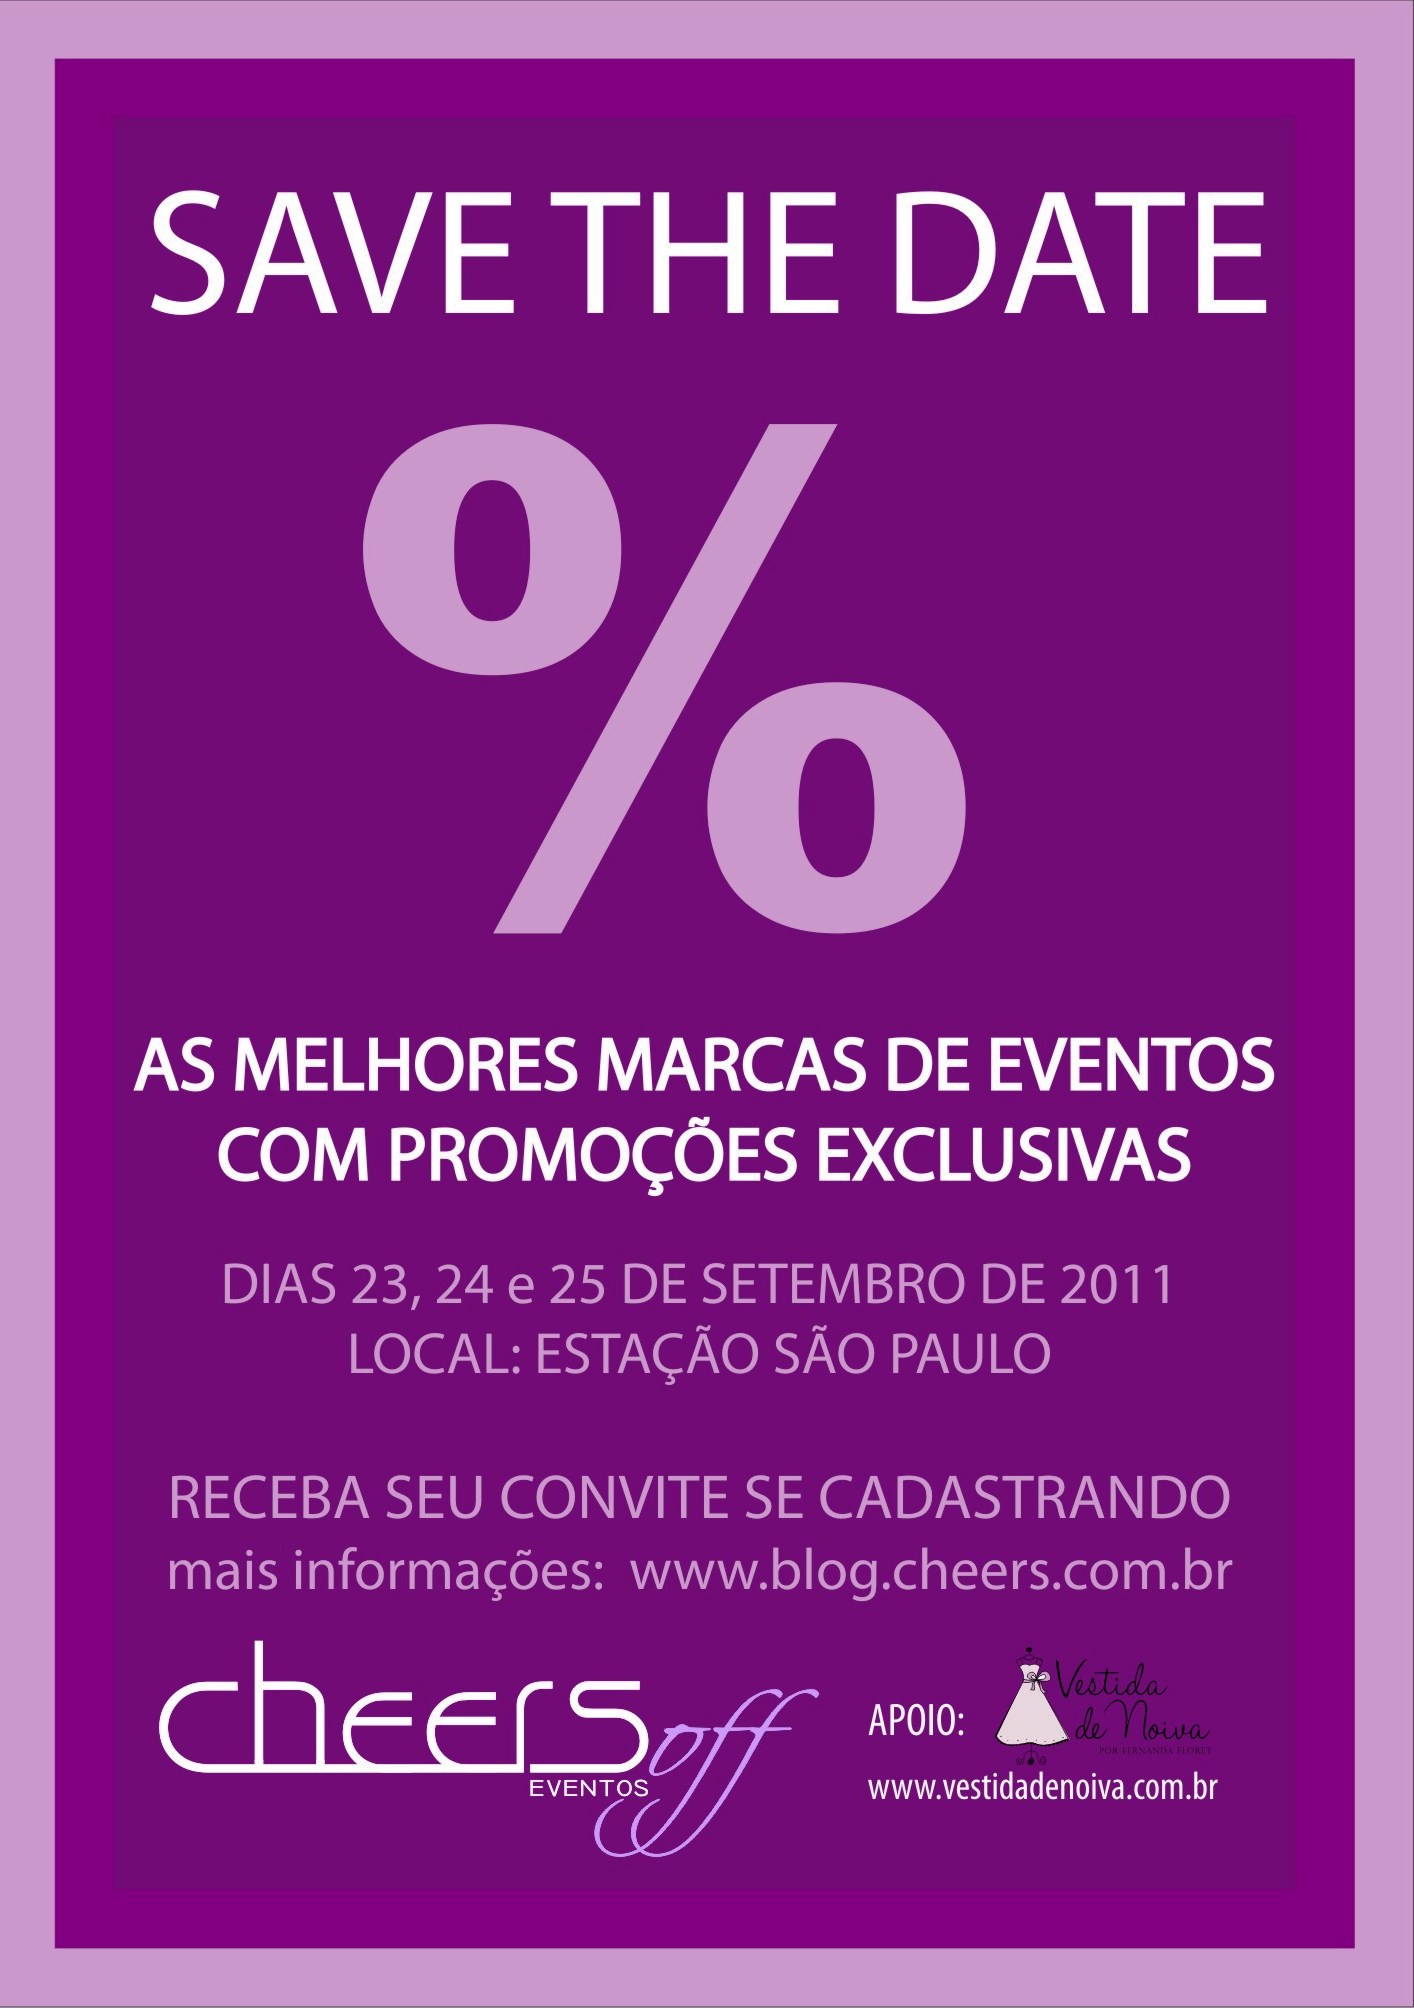 save the date cheers off Save The Data / Cheers Off fotografo